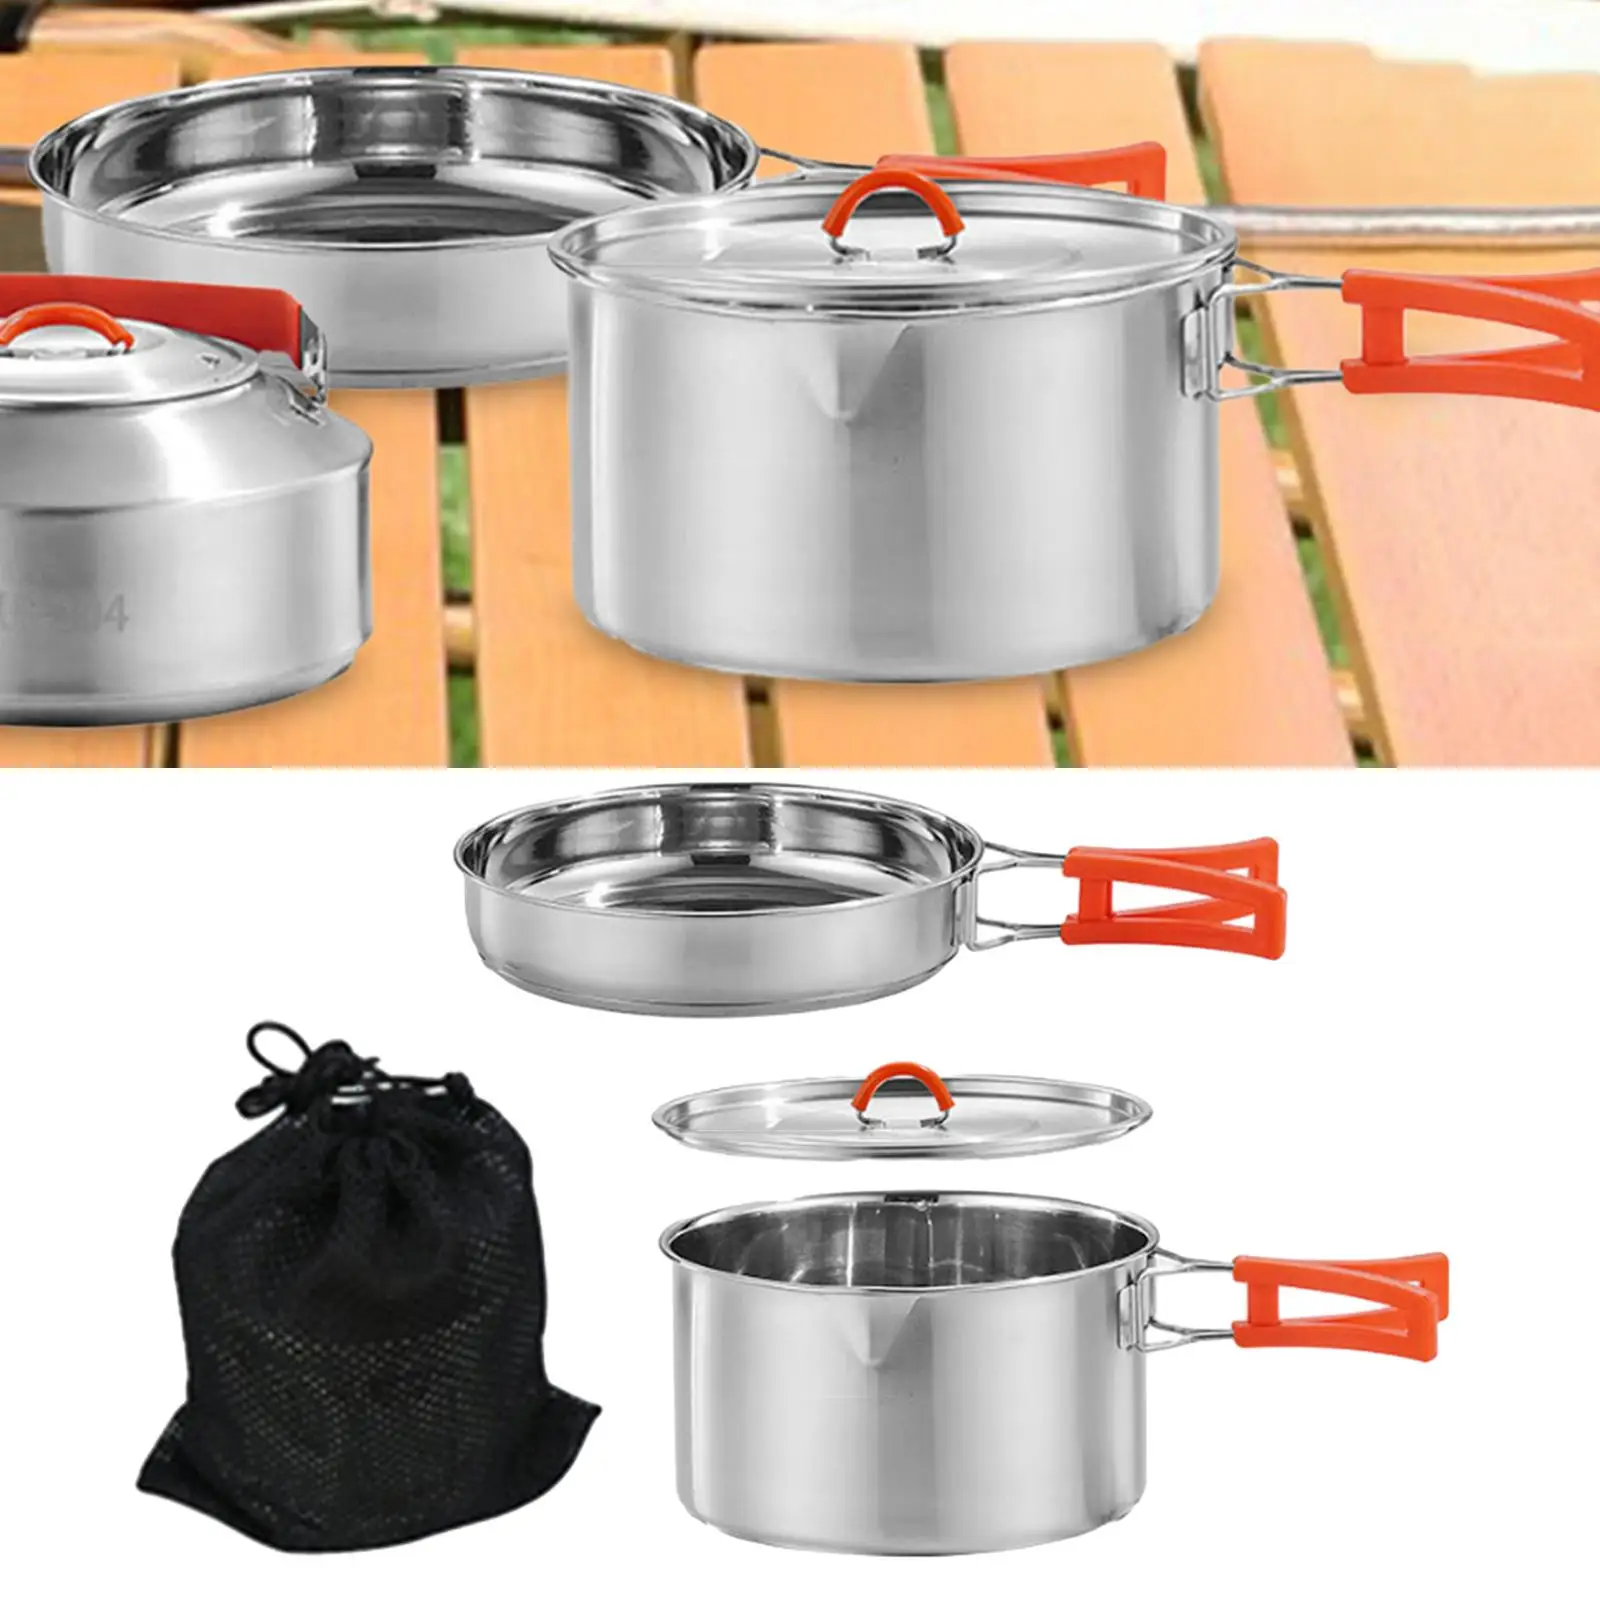 Camping Cookware Set Durable Camping Pot and Pan Set for Camp Outdoor Gear